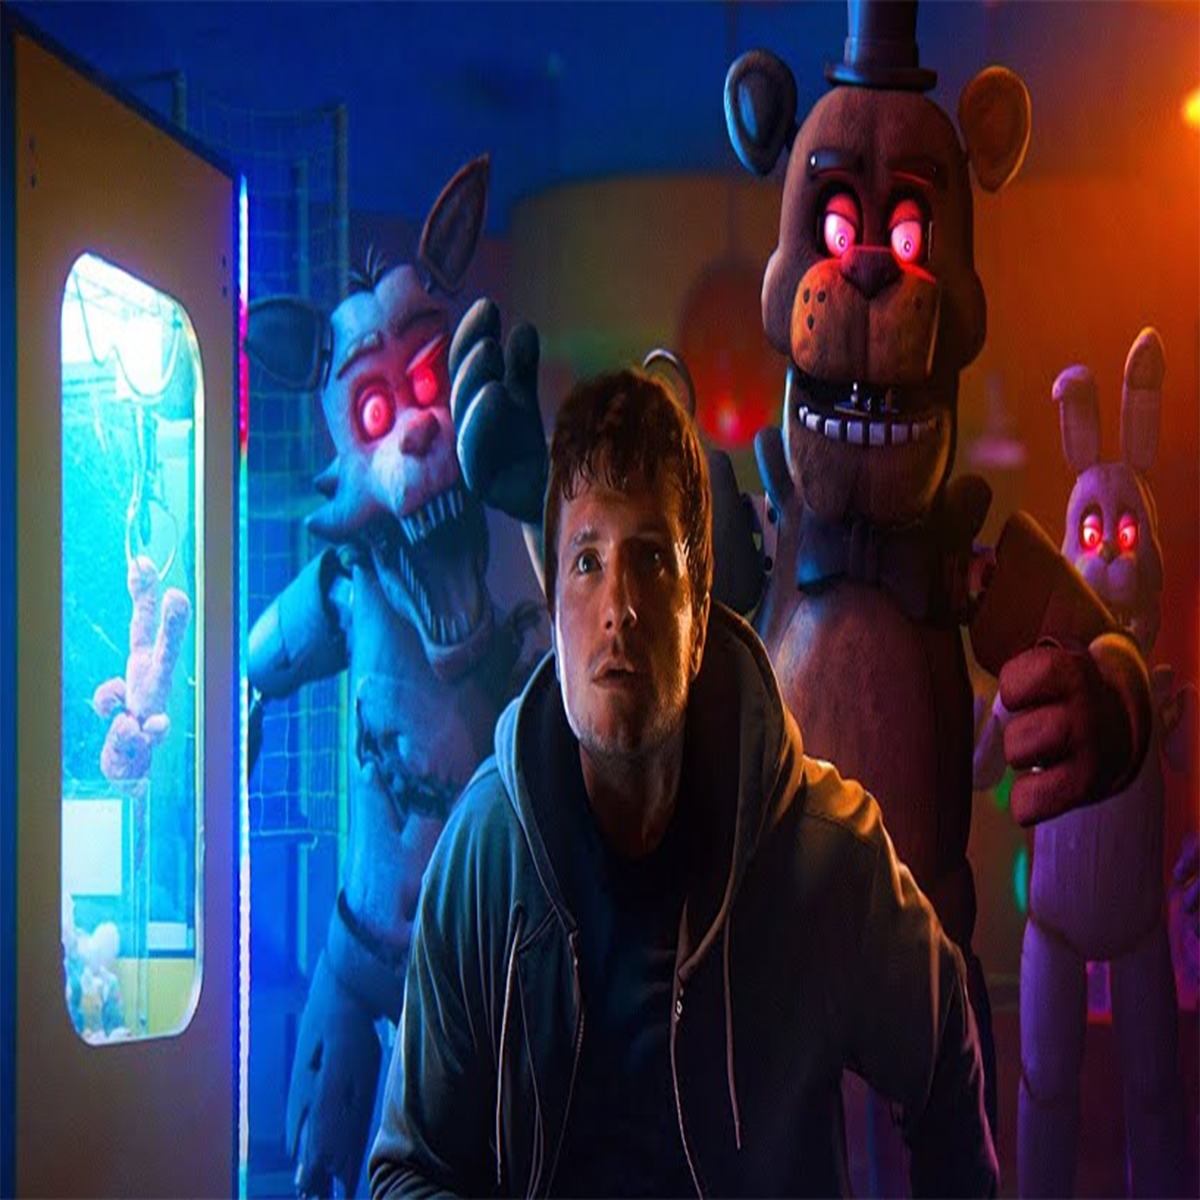 Five Nights At Freddy's 2 – TEASER TRAILER (2024) Universal Pictures 